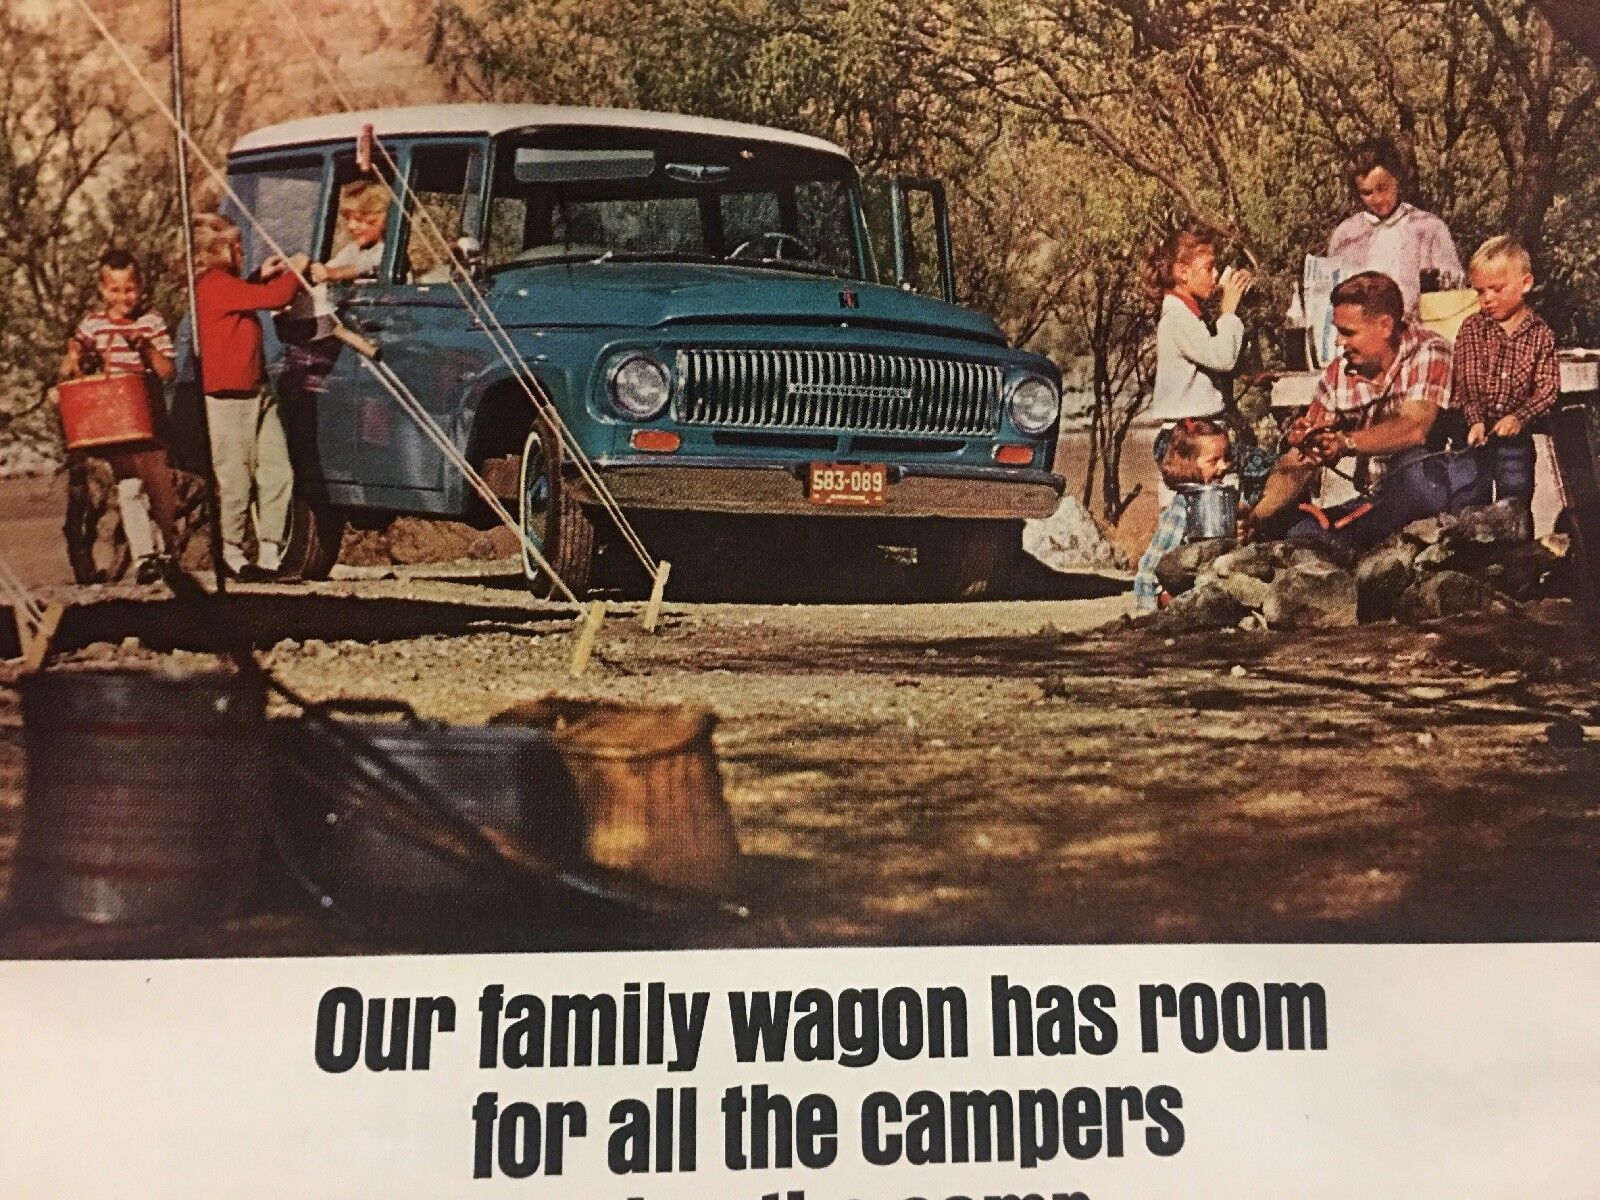 1965 International Harvester Travelall Family Camper Station Wagon Camping Ad